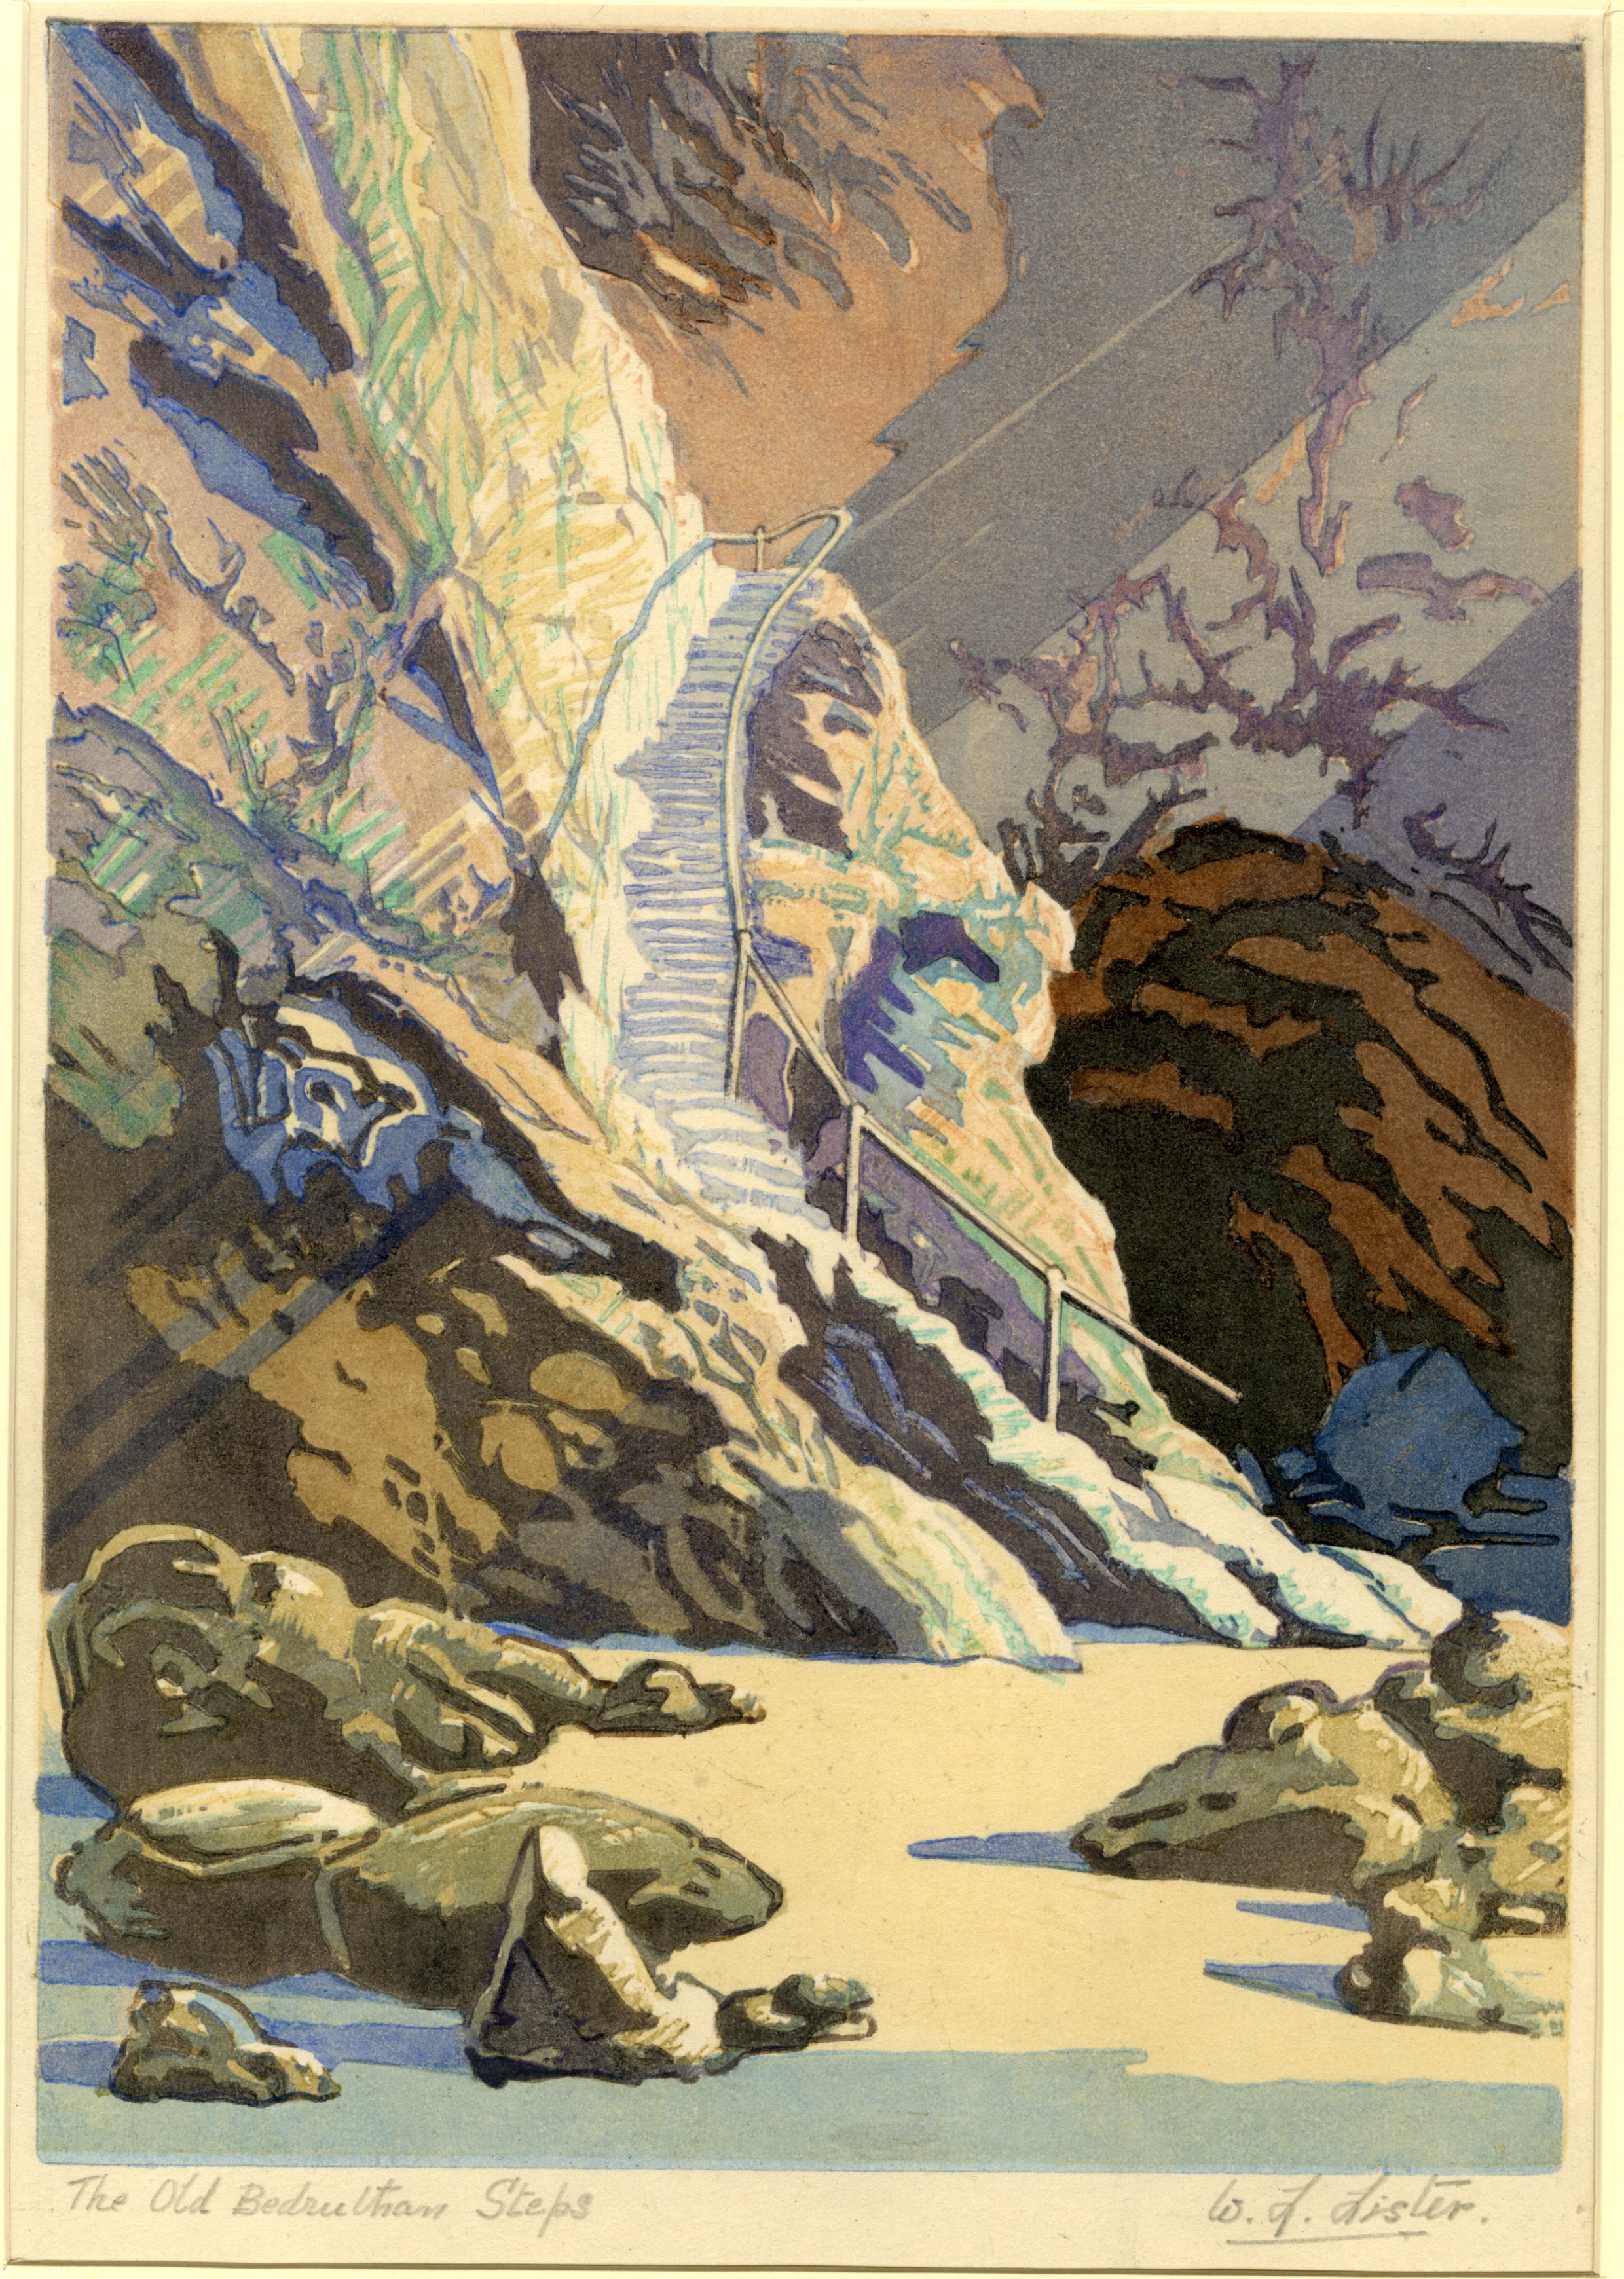 The old Bedruthan Steps (circa 1927)